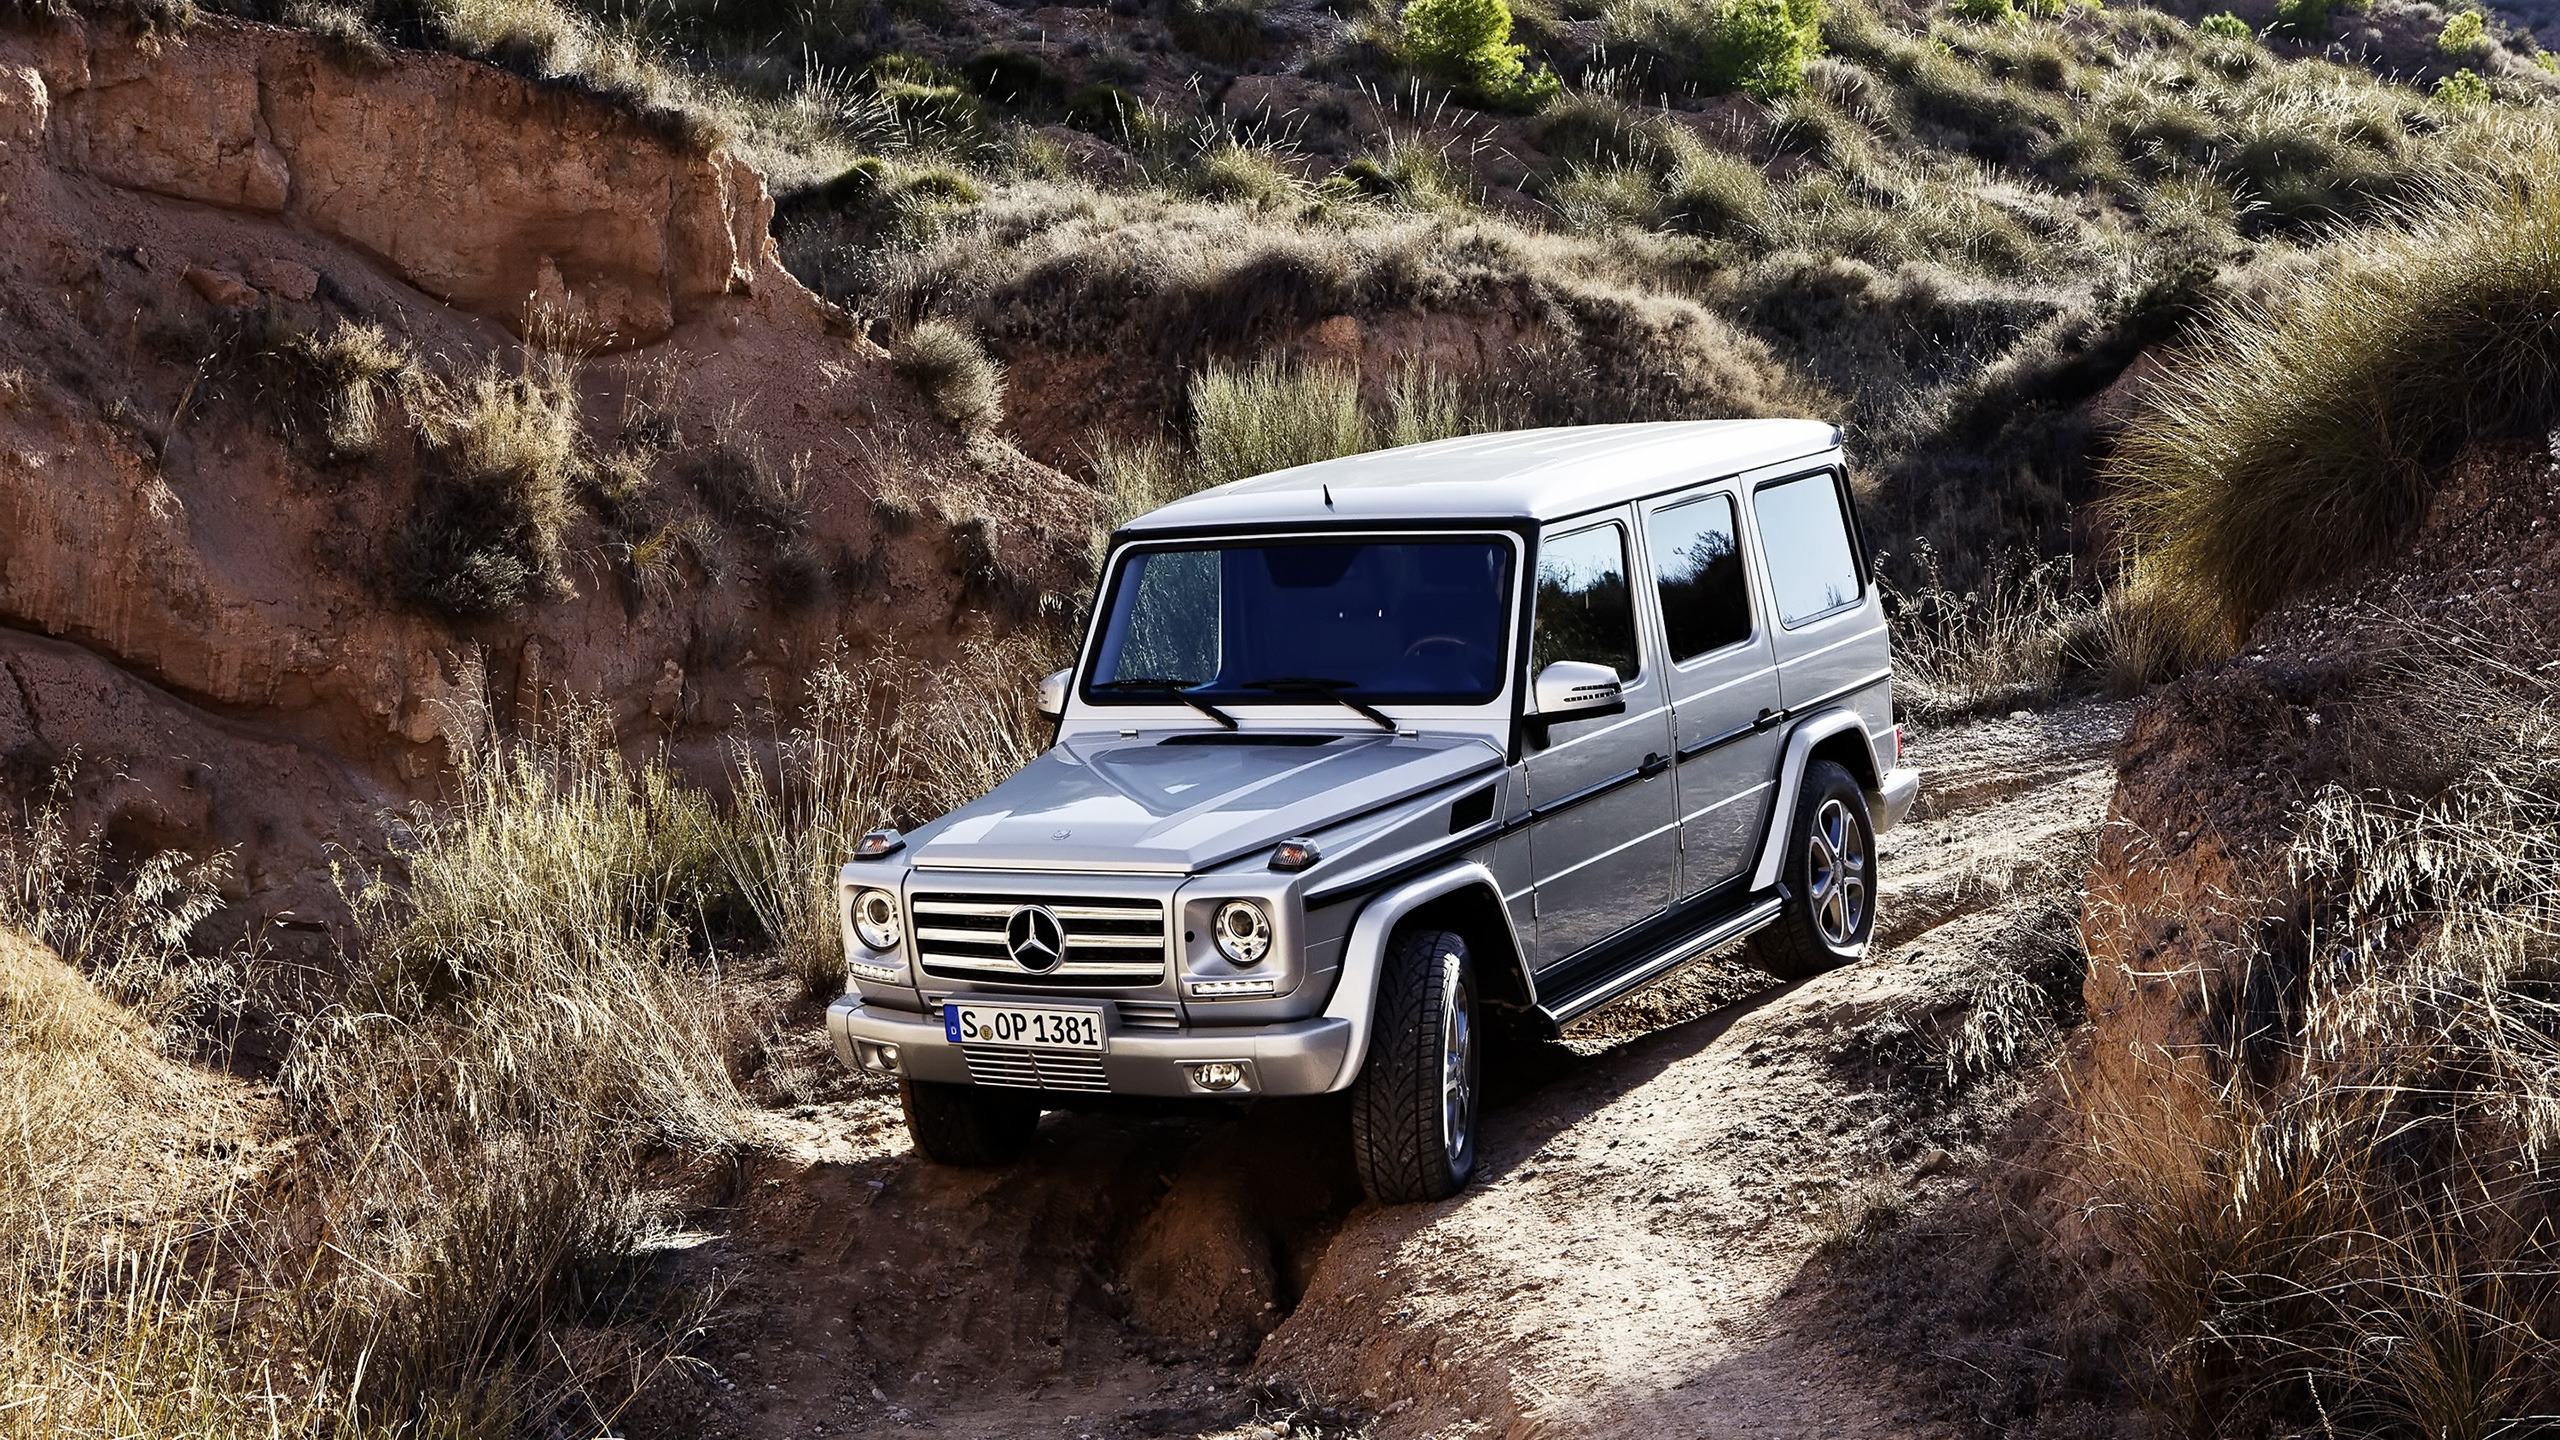 2013 Mercedes Benz G Class Off Road for 2560x1440 HDTV resolution